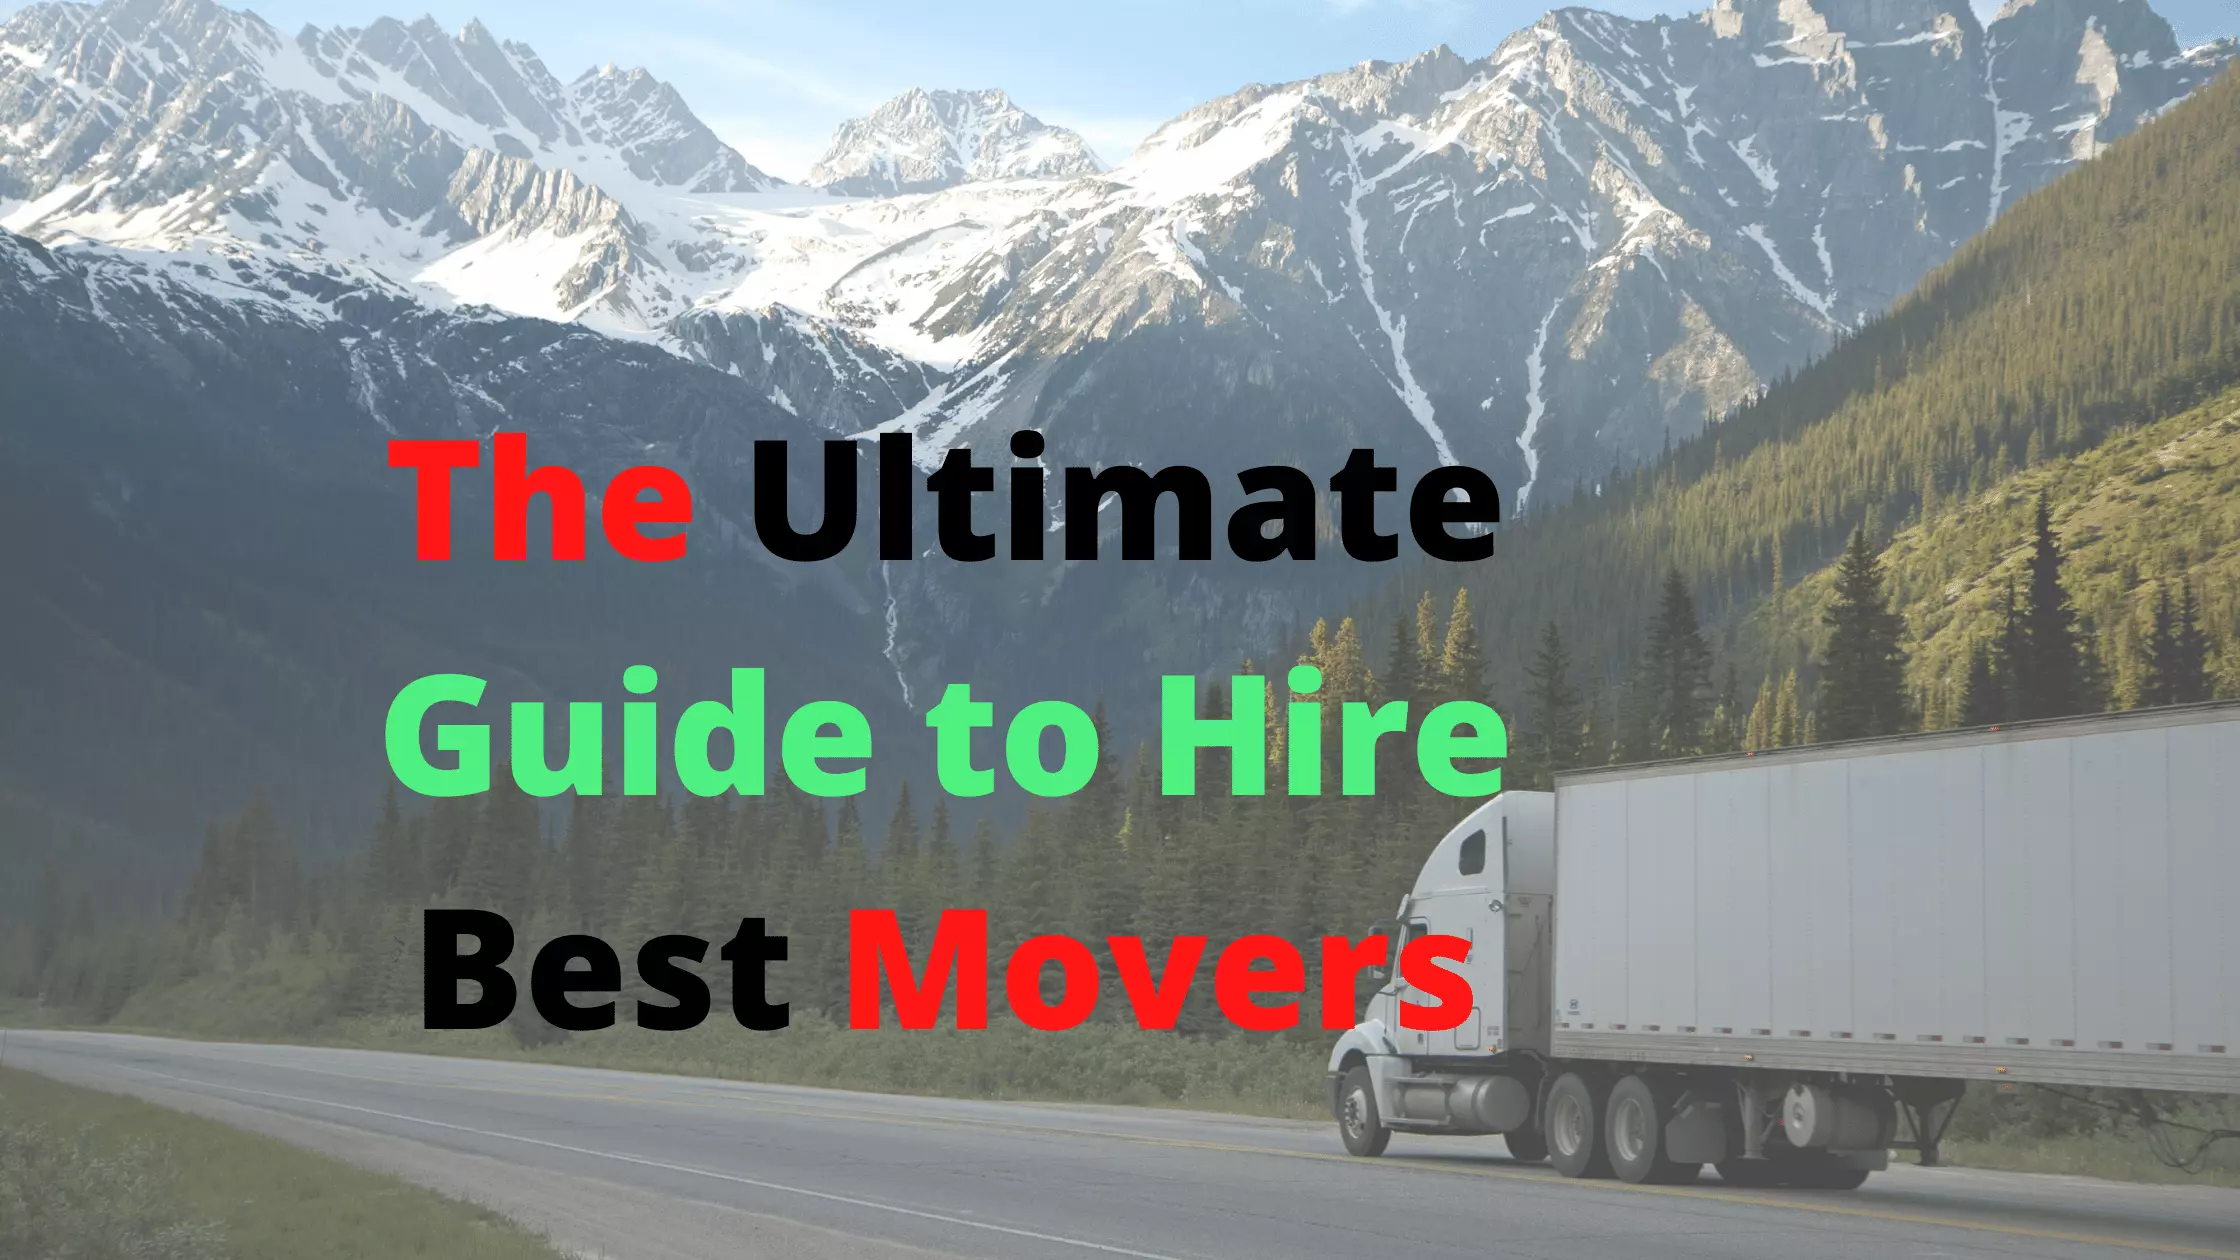 The Ultimate Guide to Hire Best Movers (Complete Guide)